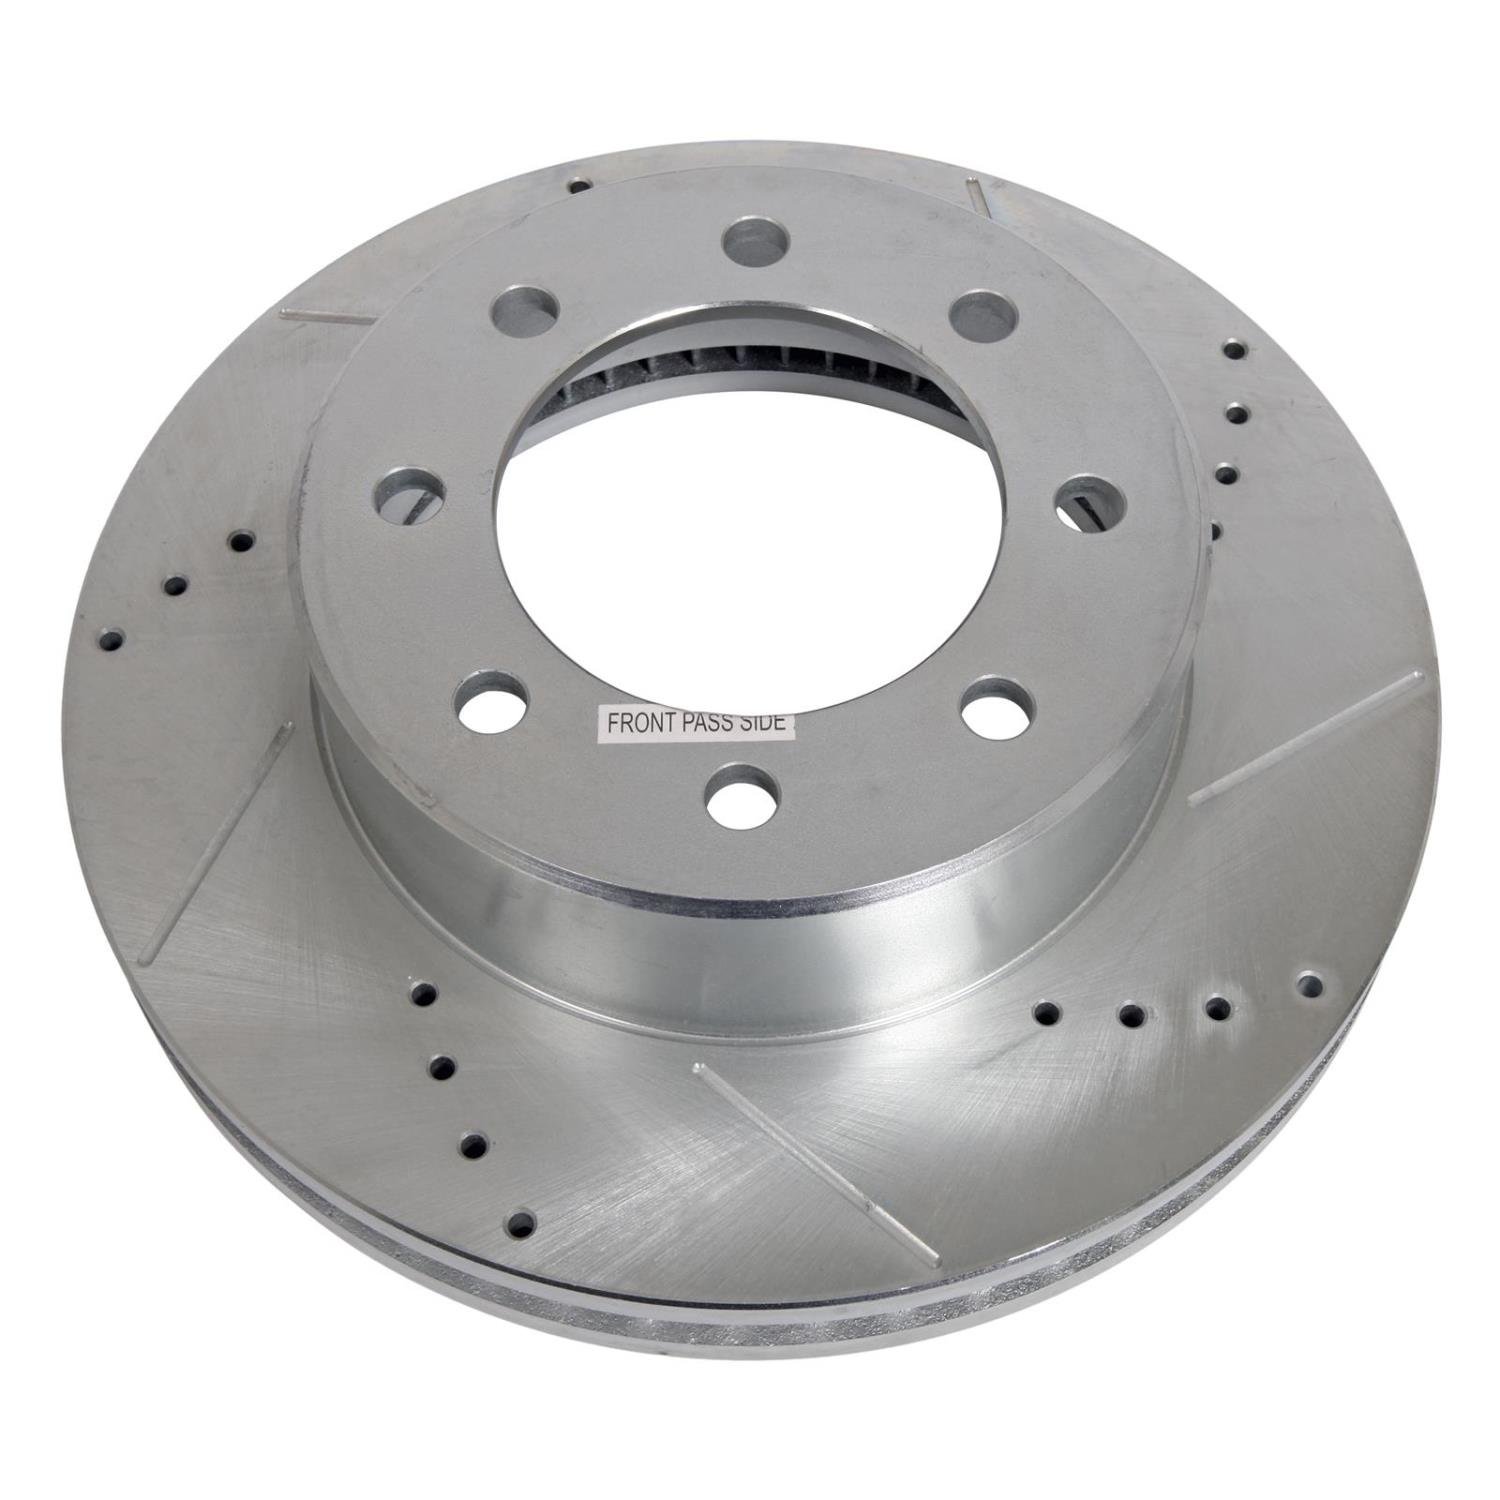 Extreme Performance Drilled And Slotted Brake Rotor Fits